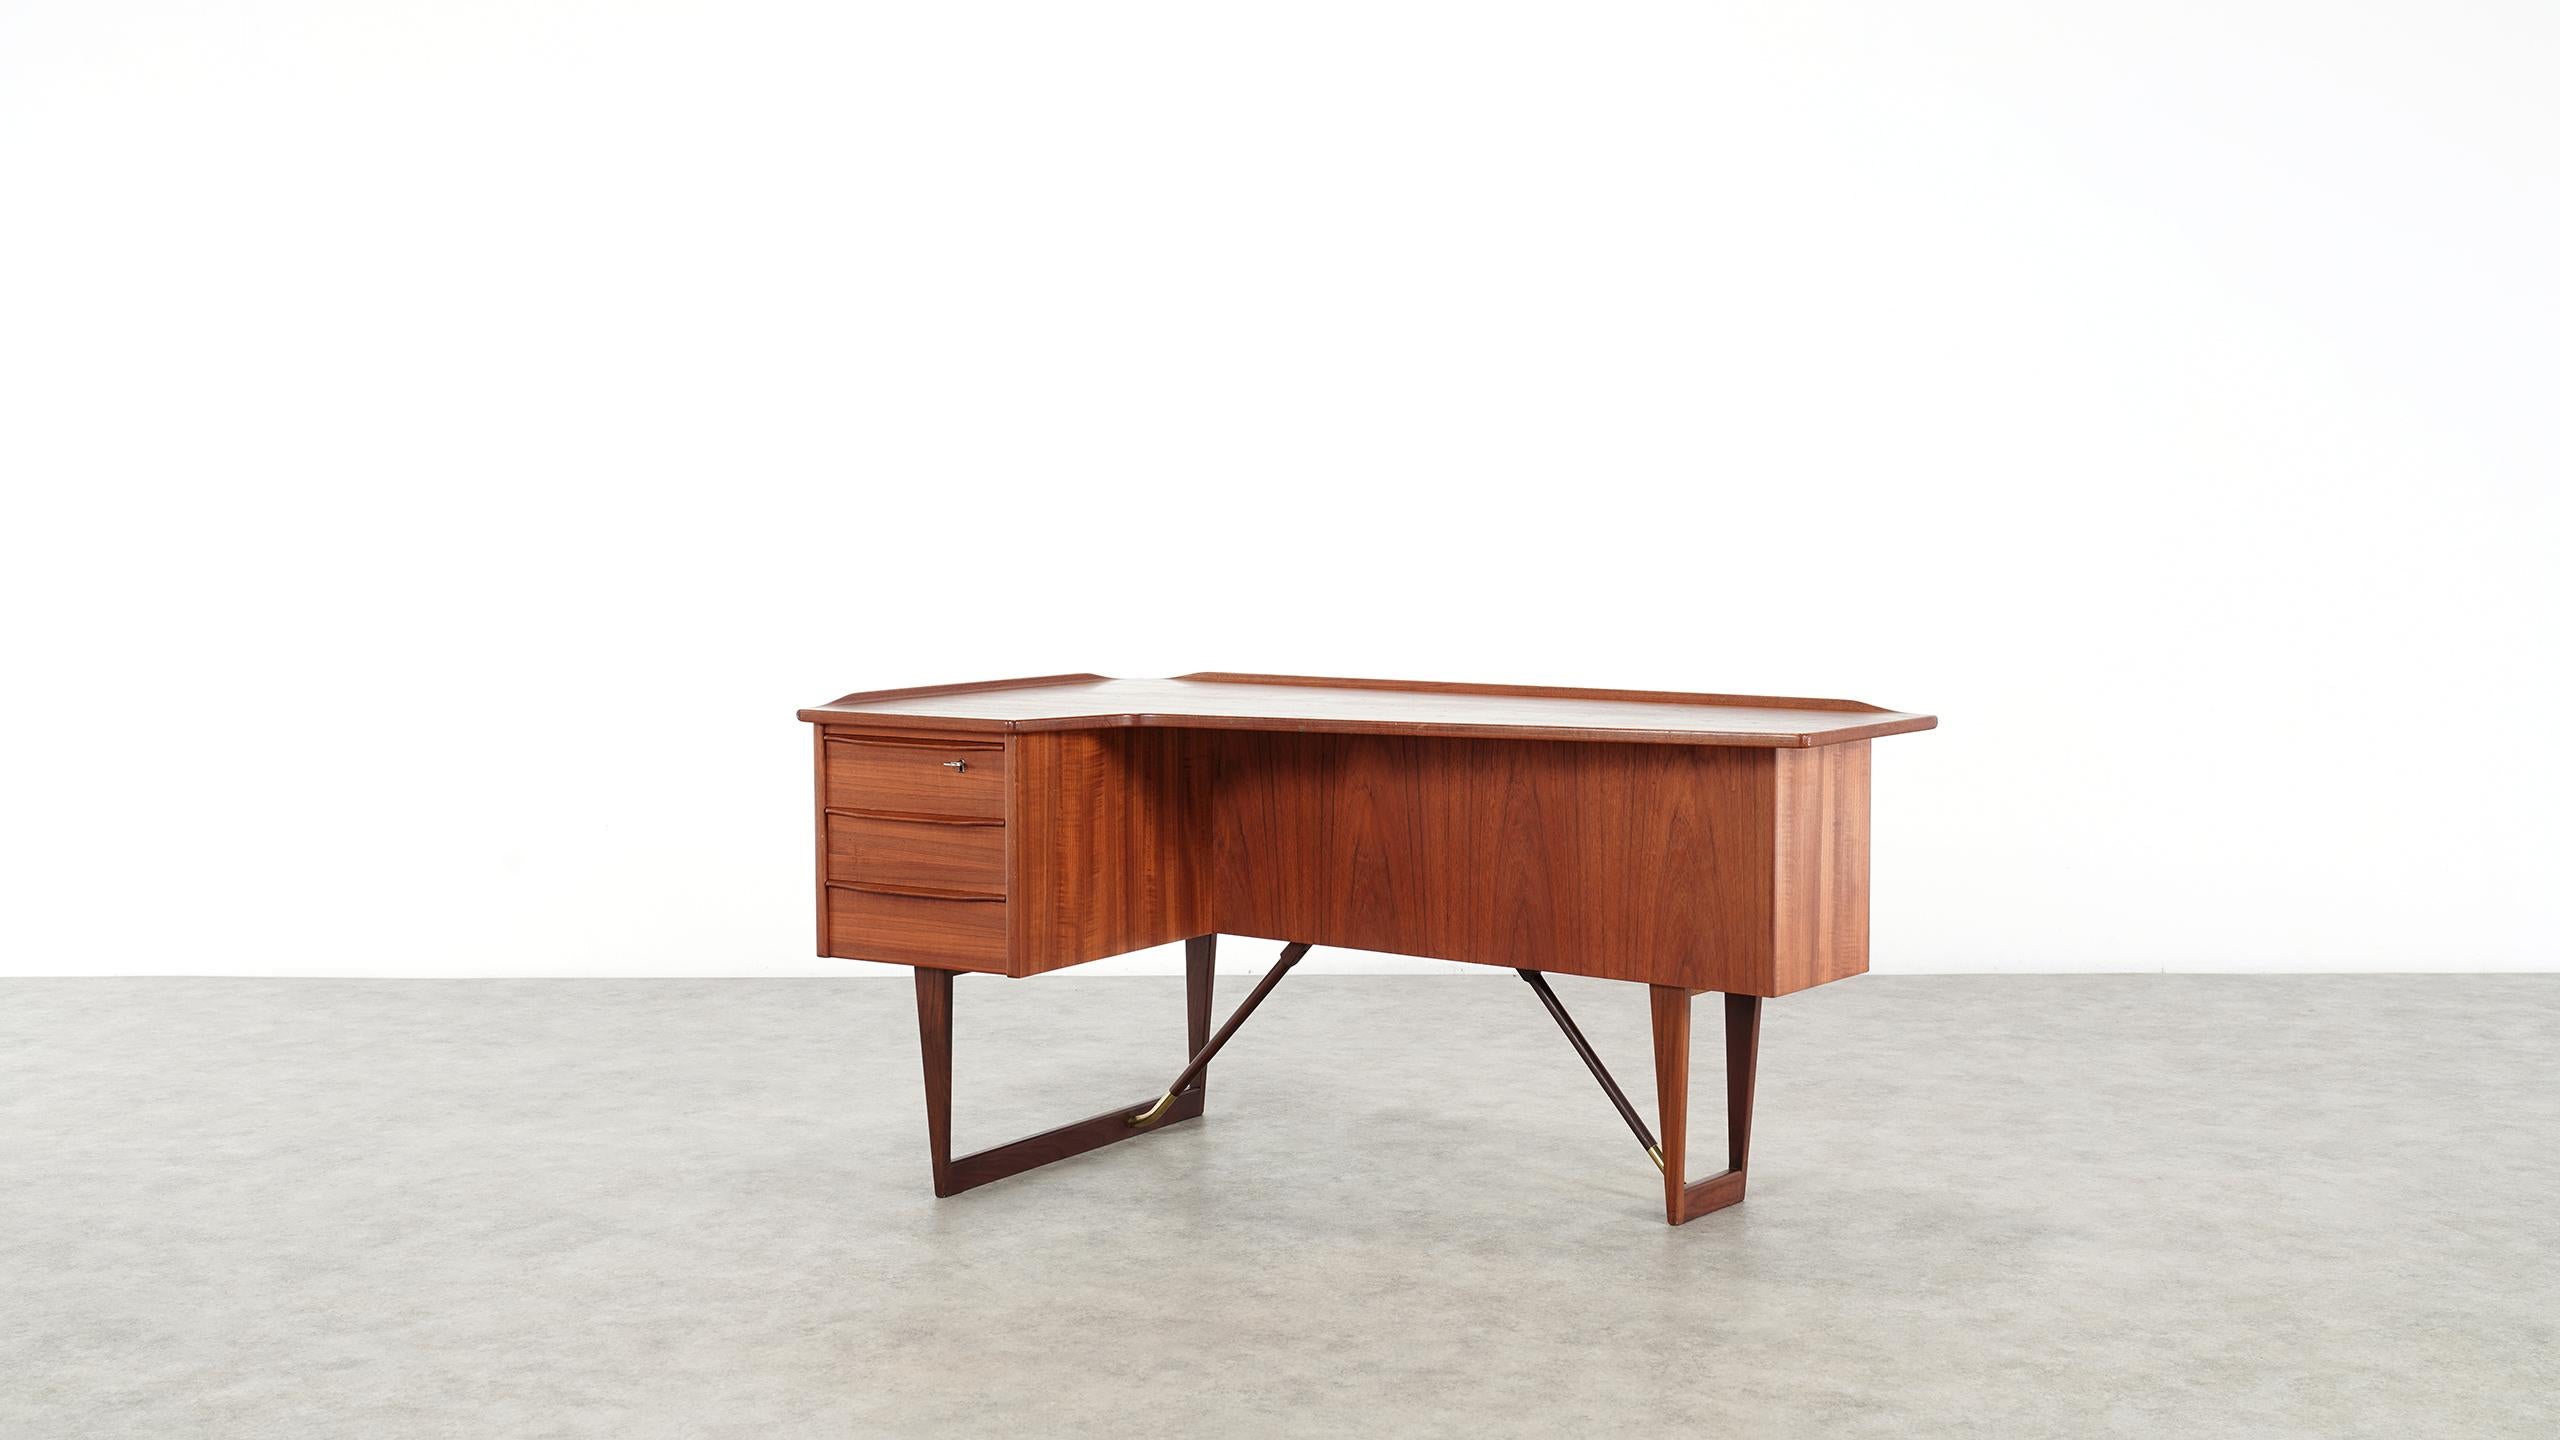 This free standing midcentury Danish writing desk was designed by Peter Løvig Nielsen for Løvig Dansk in 1969 (signed and stamped 1969, photo available). 

The front side features three drawers with an additional case in the top drawer. The